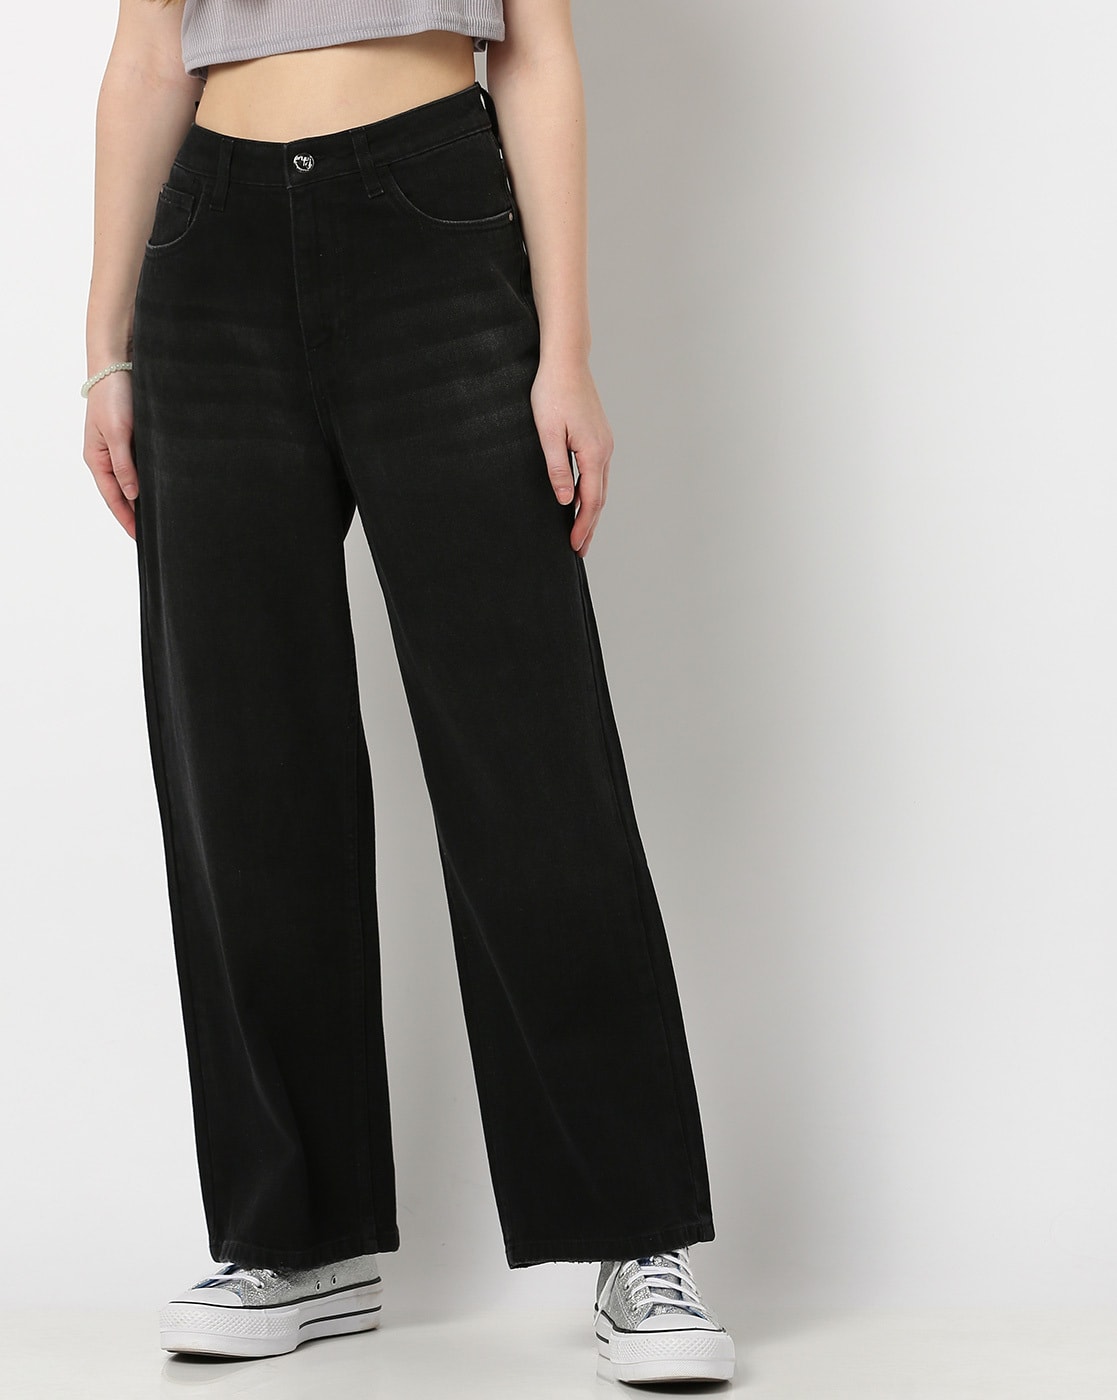 Buy Black Jeans & Jeggings for Women by MISS PLAYERS Online